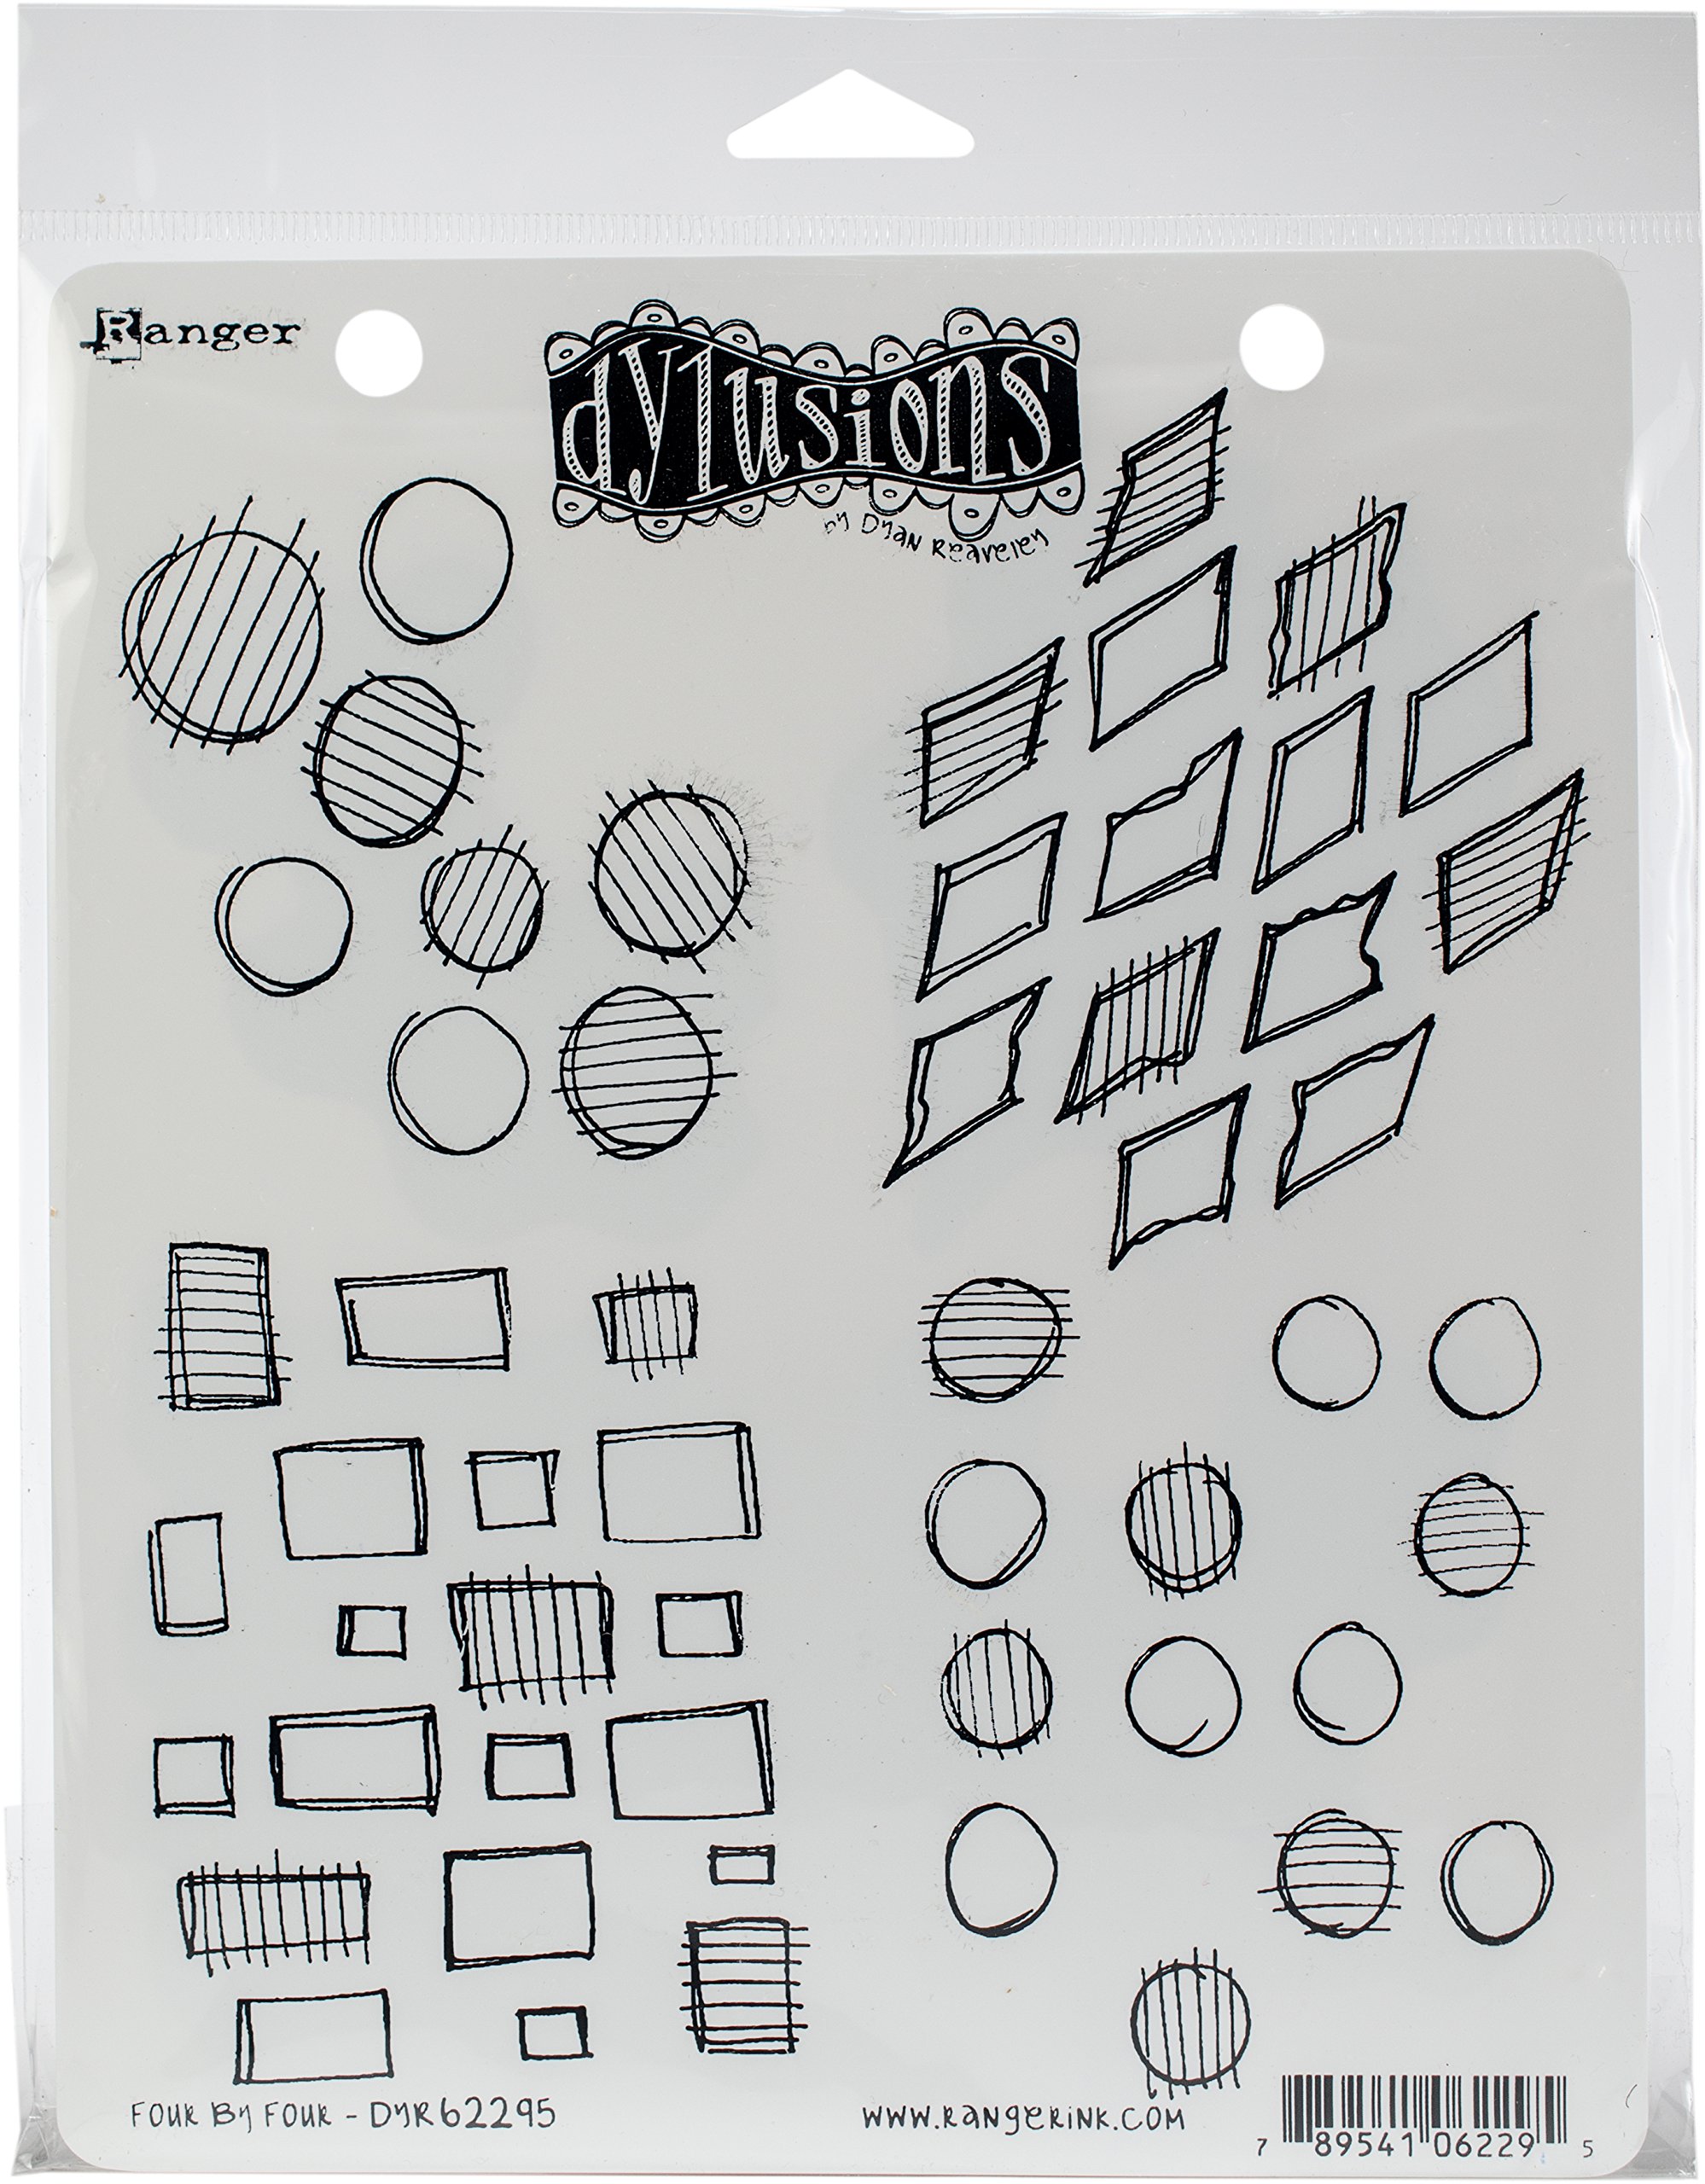 Ranger Dylusions Stempel-Set 4, synthetisches Material, mehrfarbig, 24,3 x 17,8 x 0,6 cm